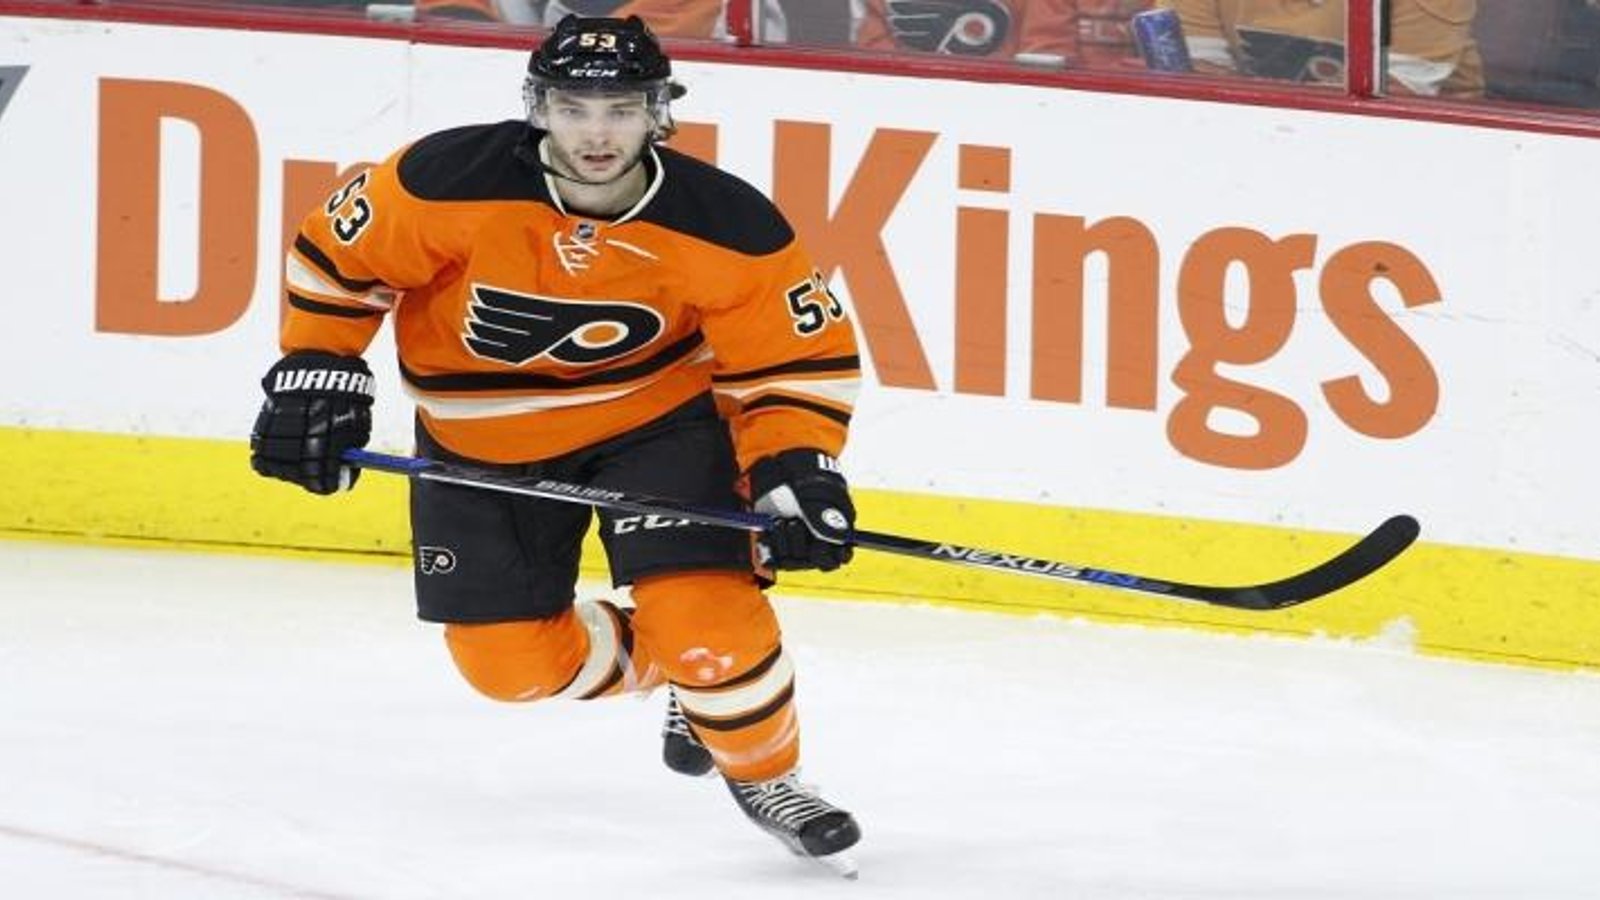 Is Gostisbehere a front runner for Rookie of the Year?